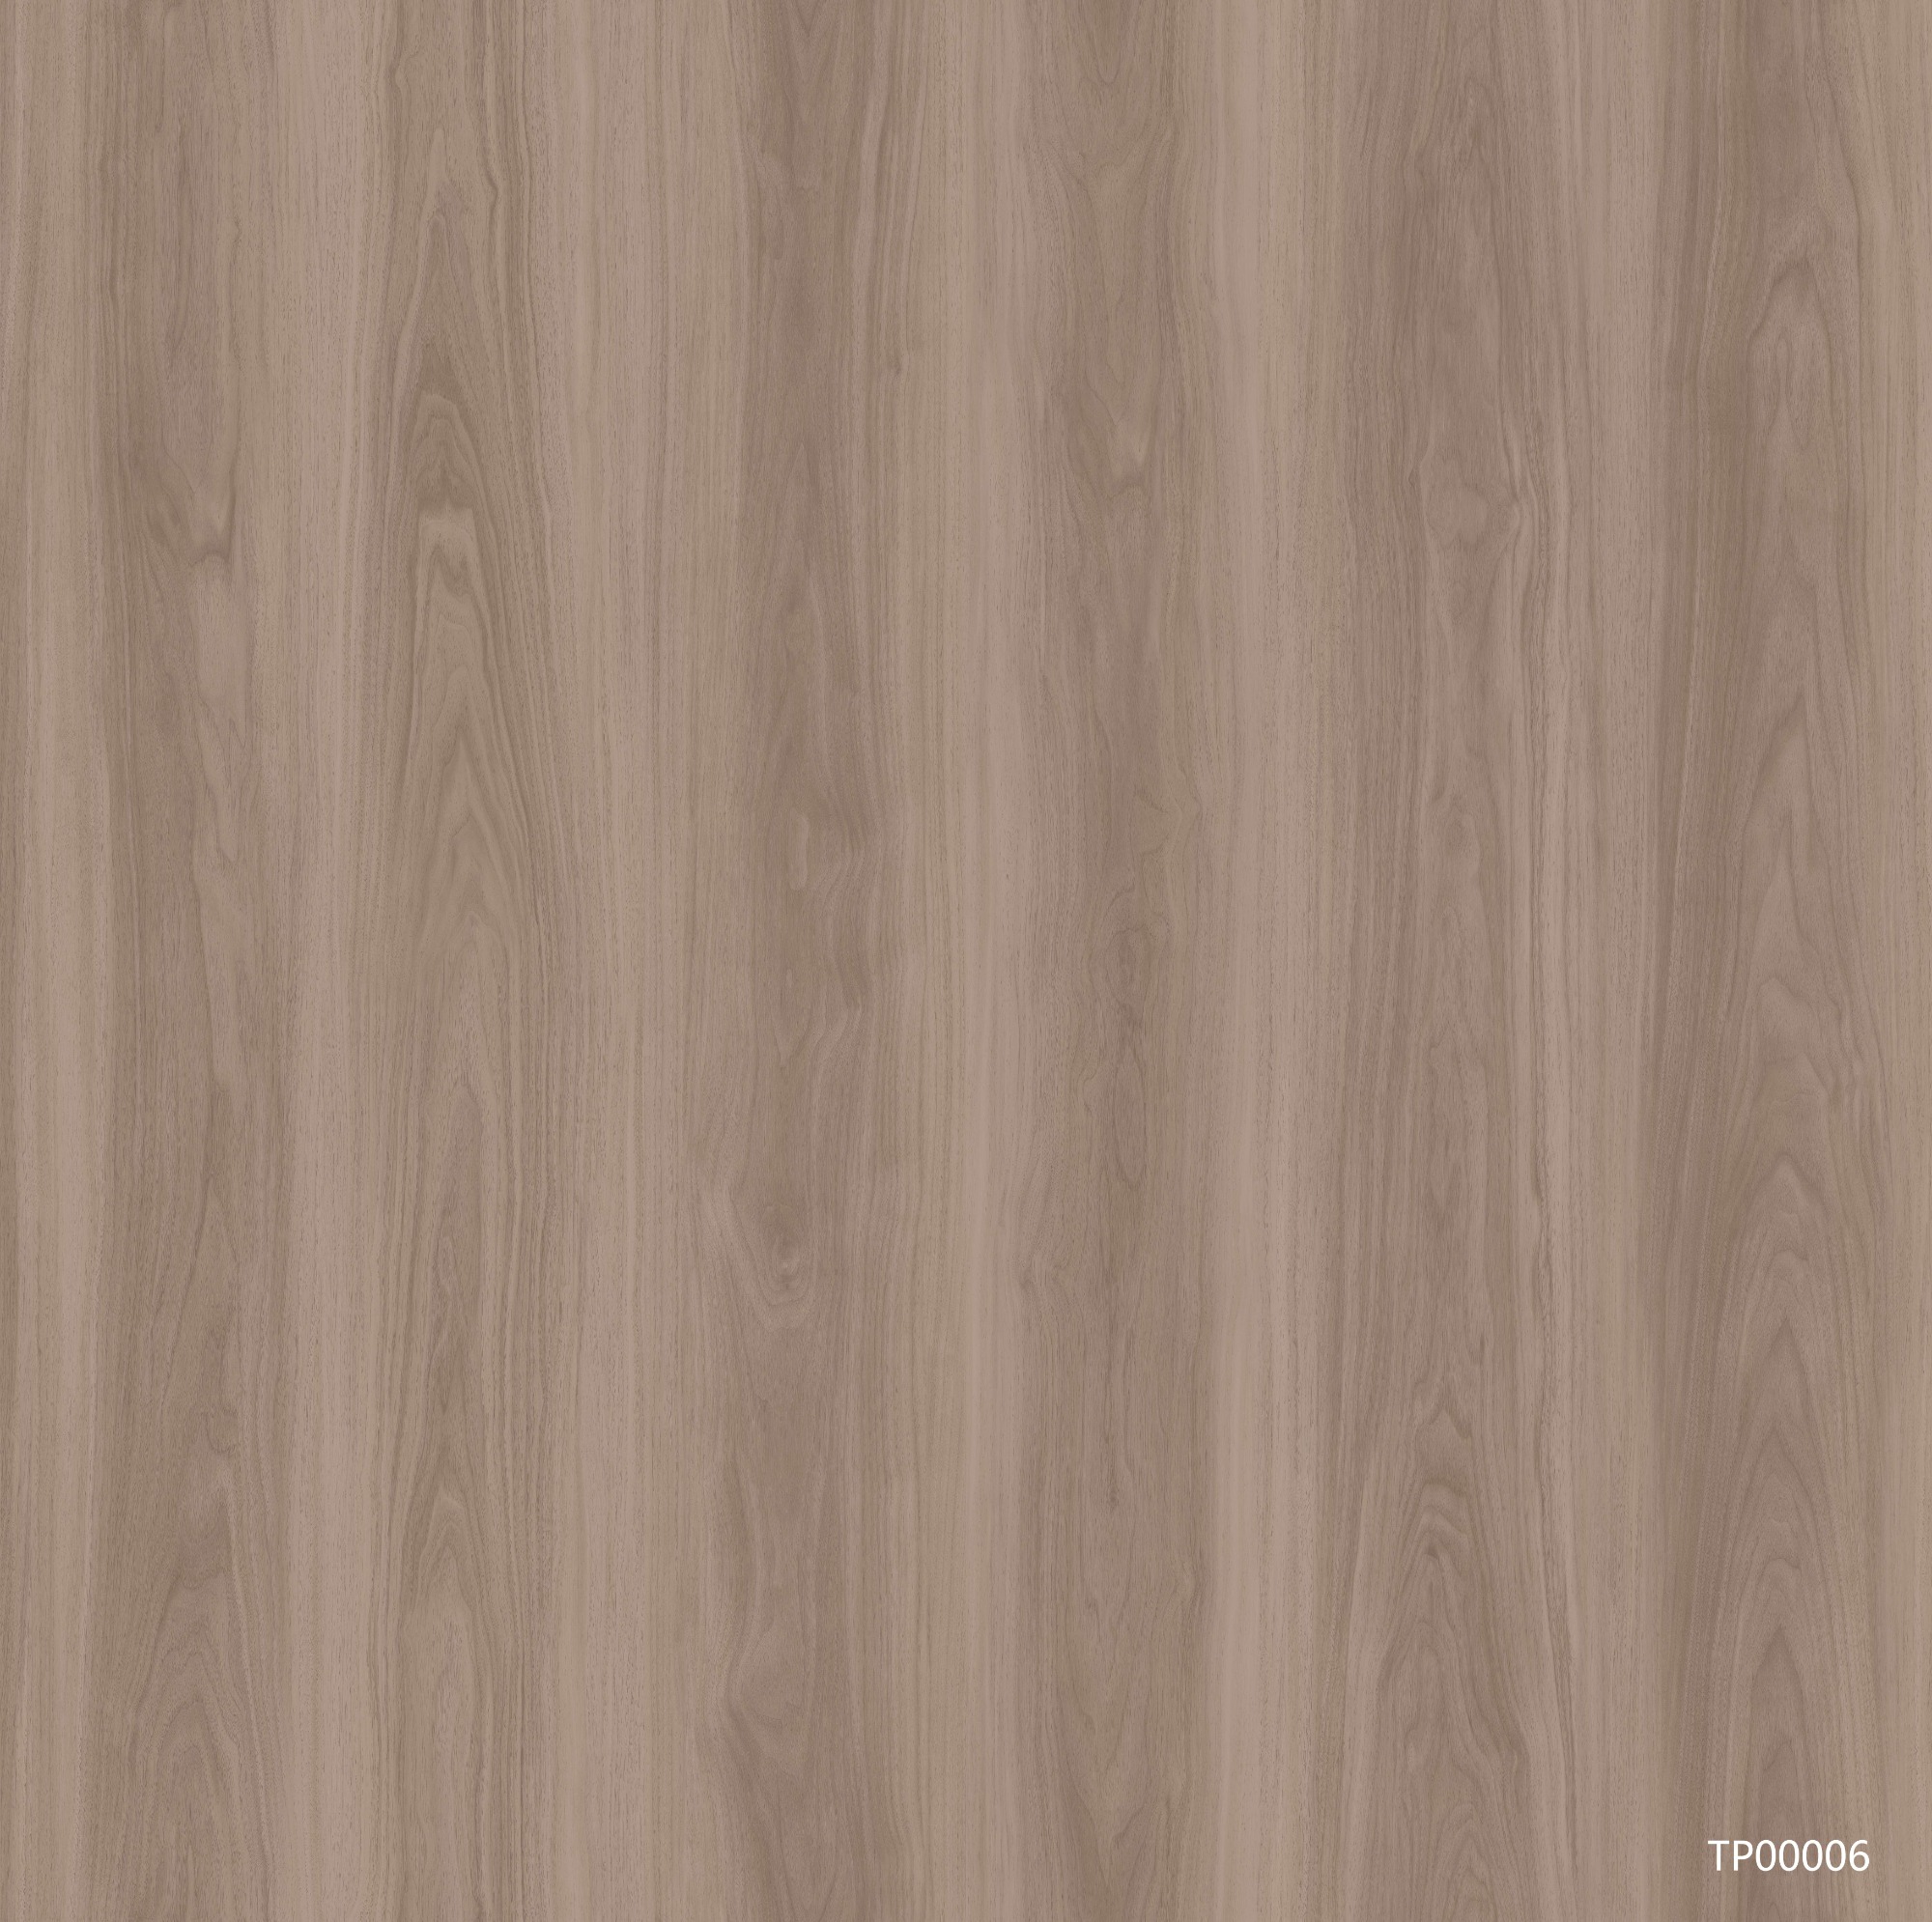 TP00006 Melamine paper with wood grain